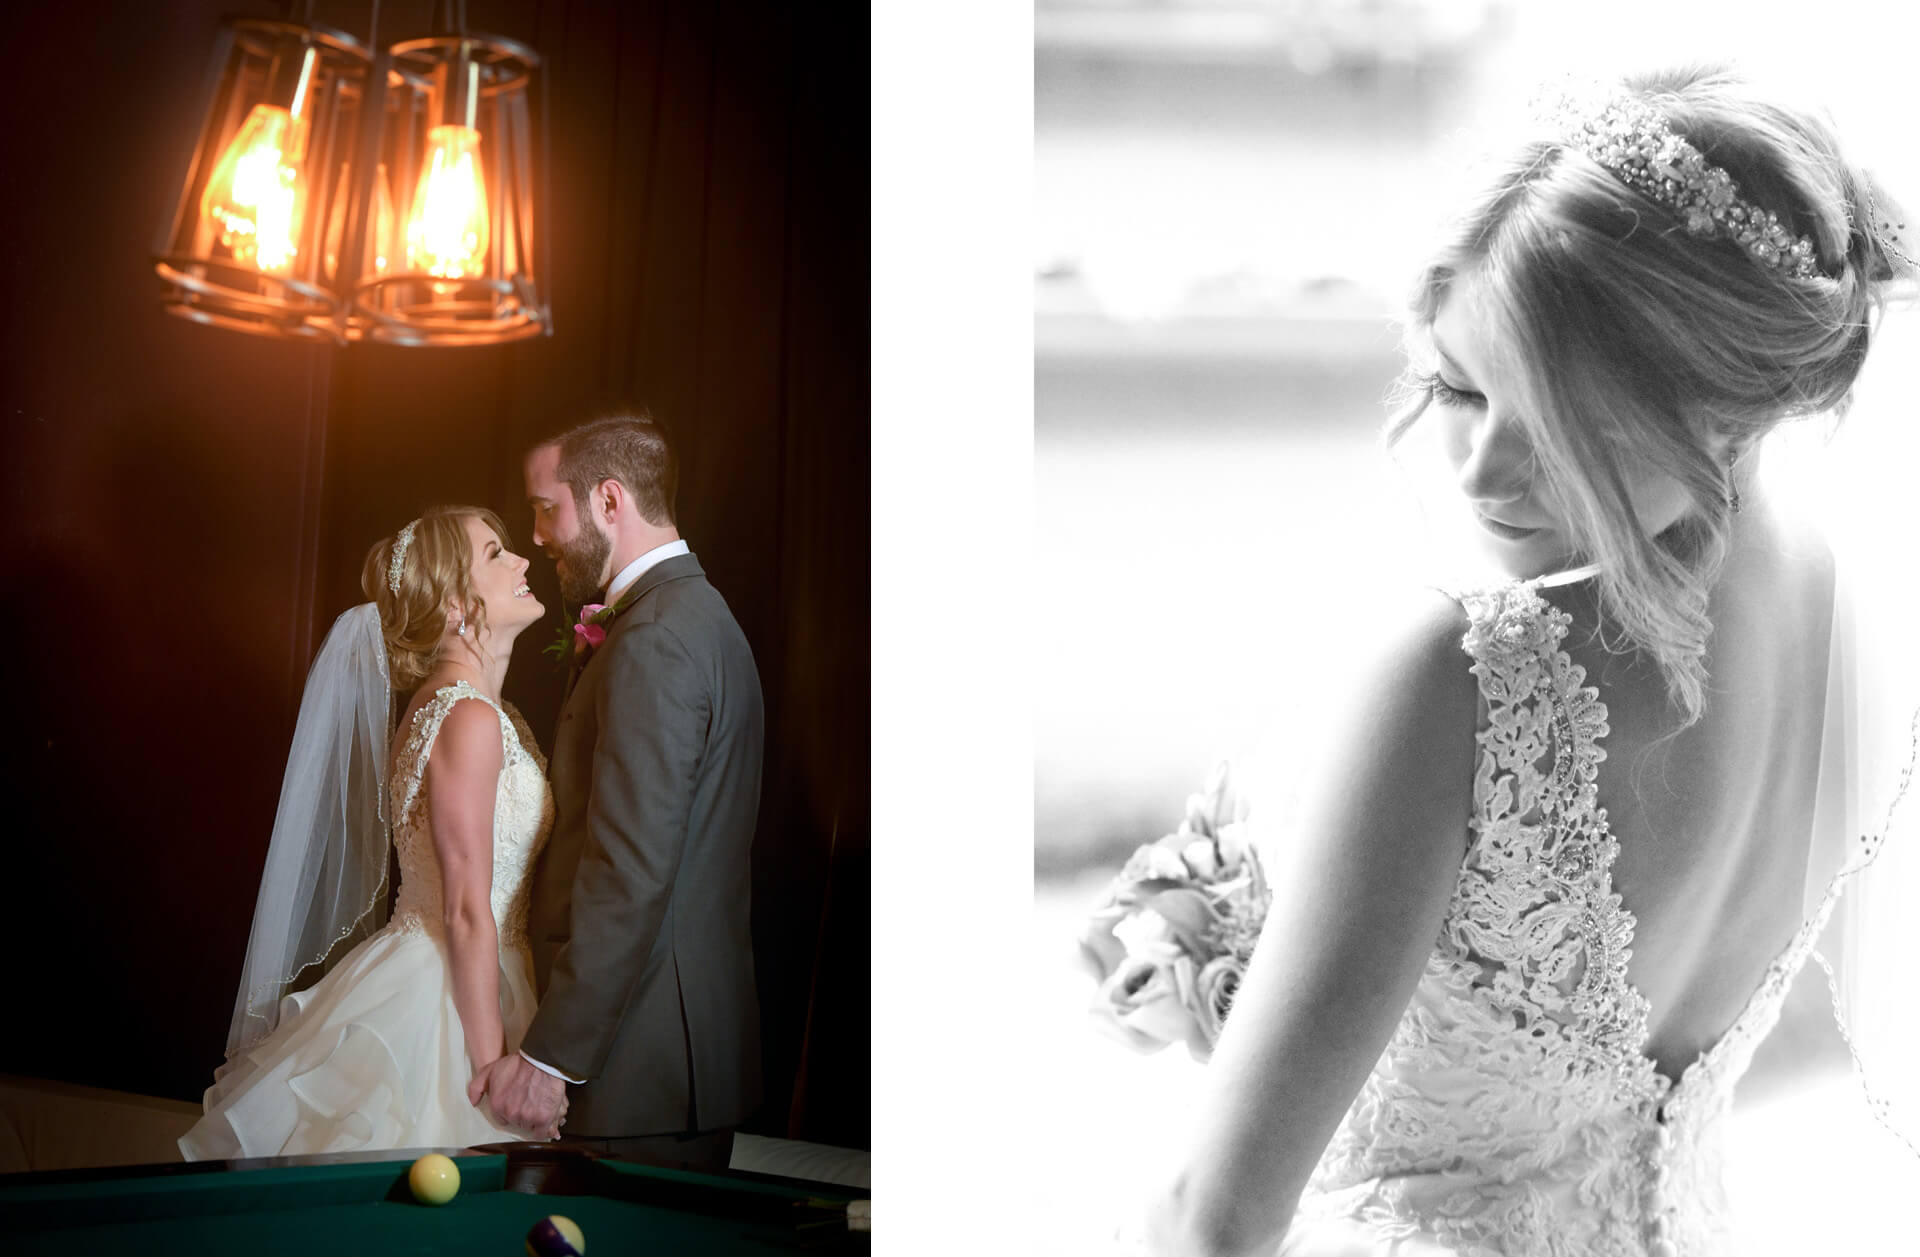 Two photos featuring Michigan wedding couple during their Crofoot wedding in Pontiac, Michigan where all the photos took place indoors.